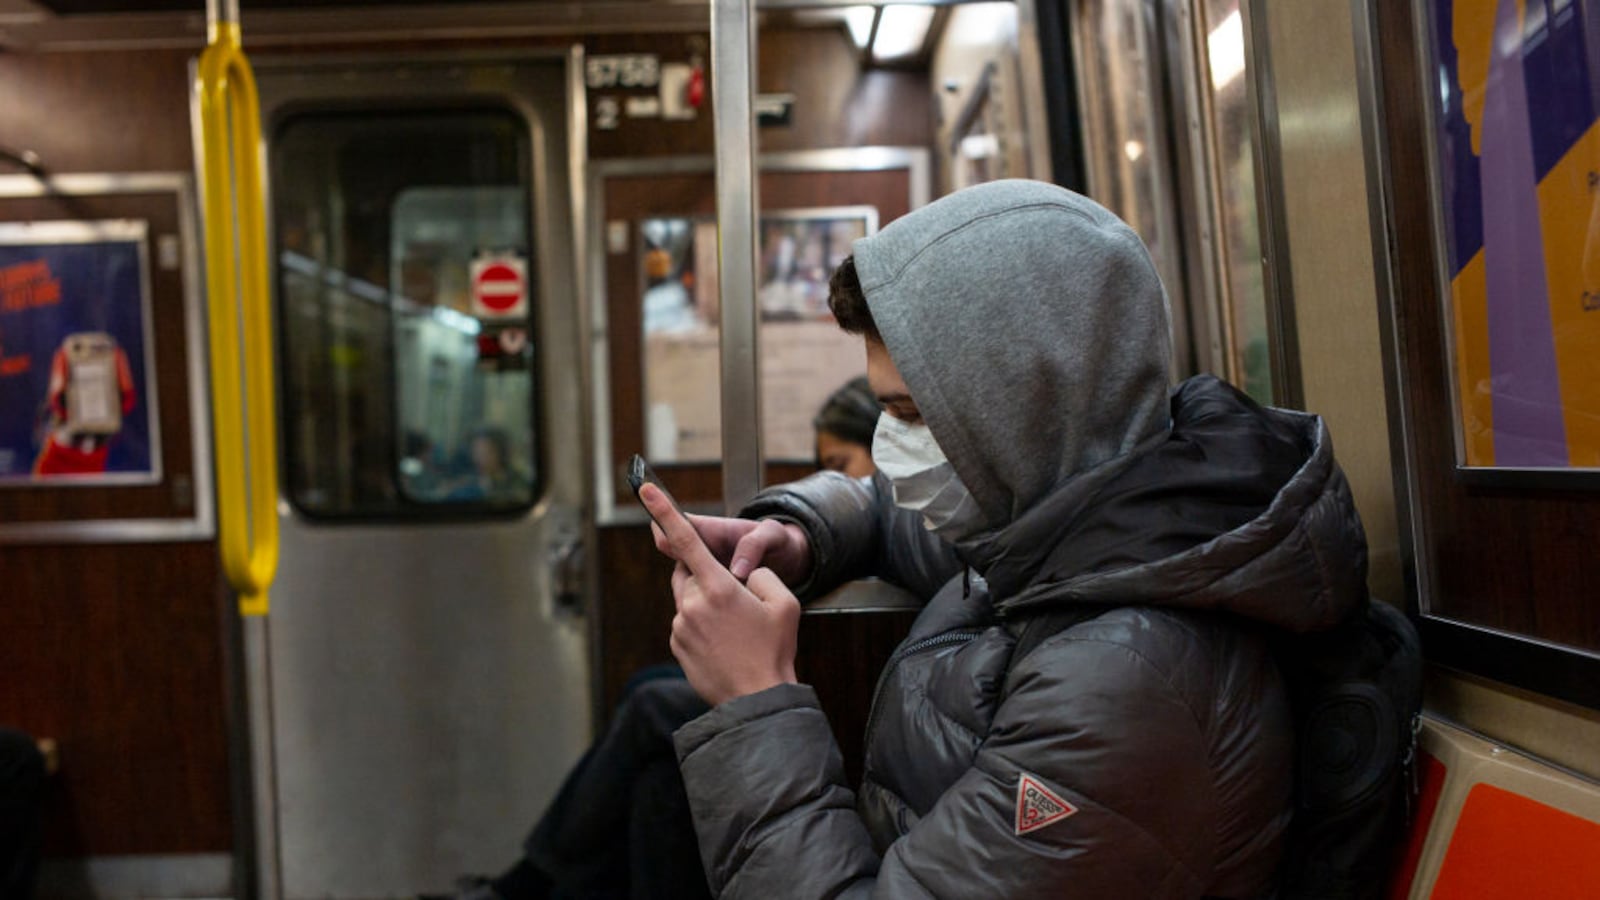 A man riding the subway in Brooklyn wears a medical facemask out of concern over the coronavirus.